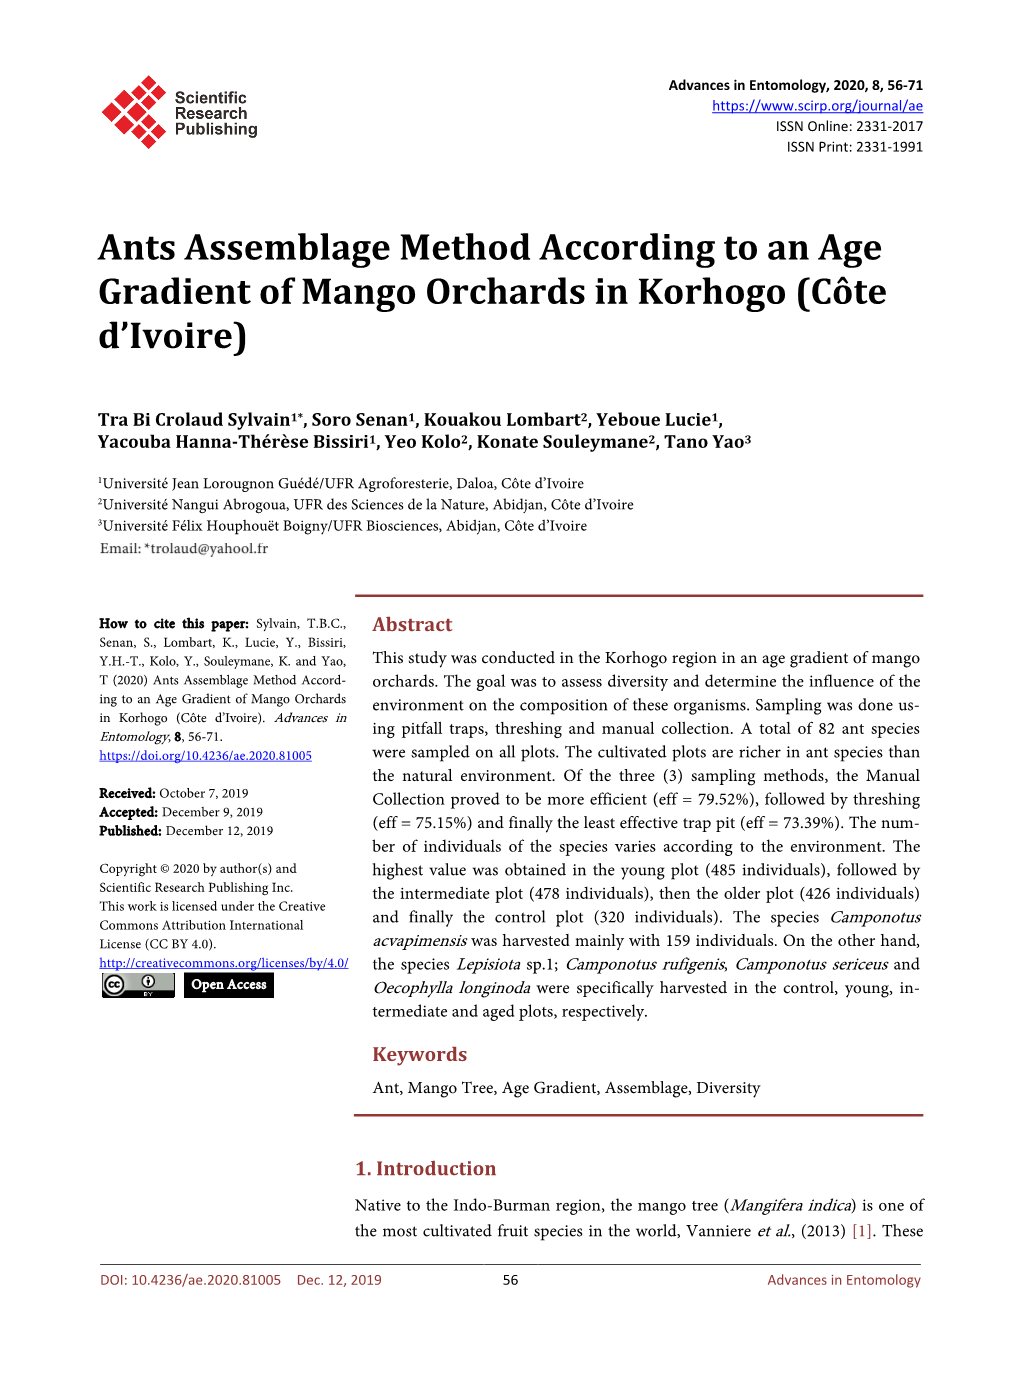 Ants Assemblage Method According to an Age Gradient of Mango Orchards in Korhogo (Côte D’Ivoire)